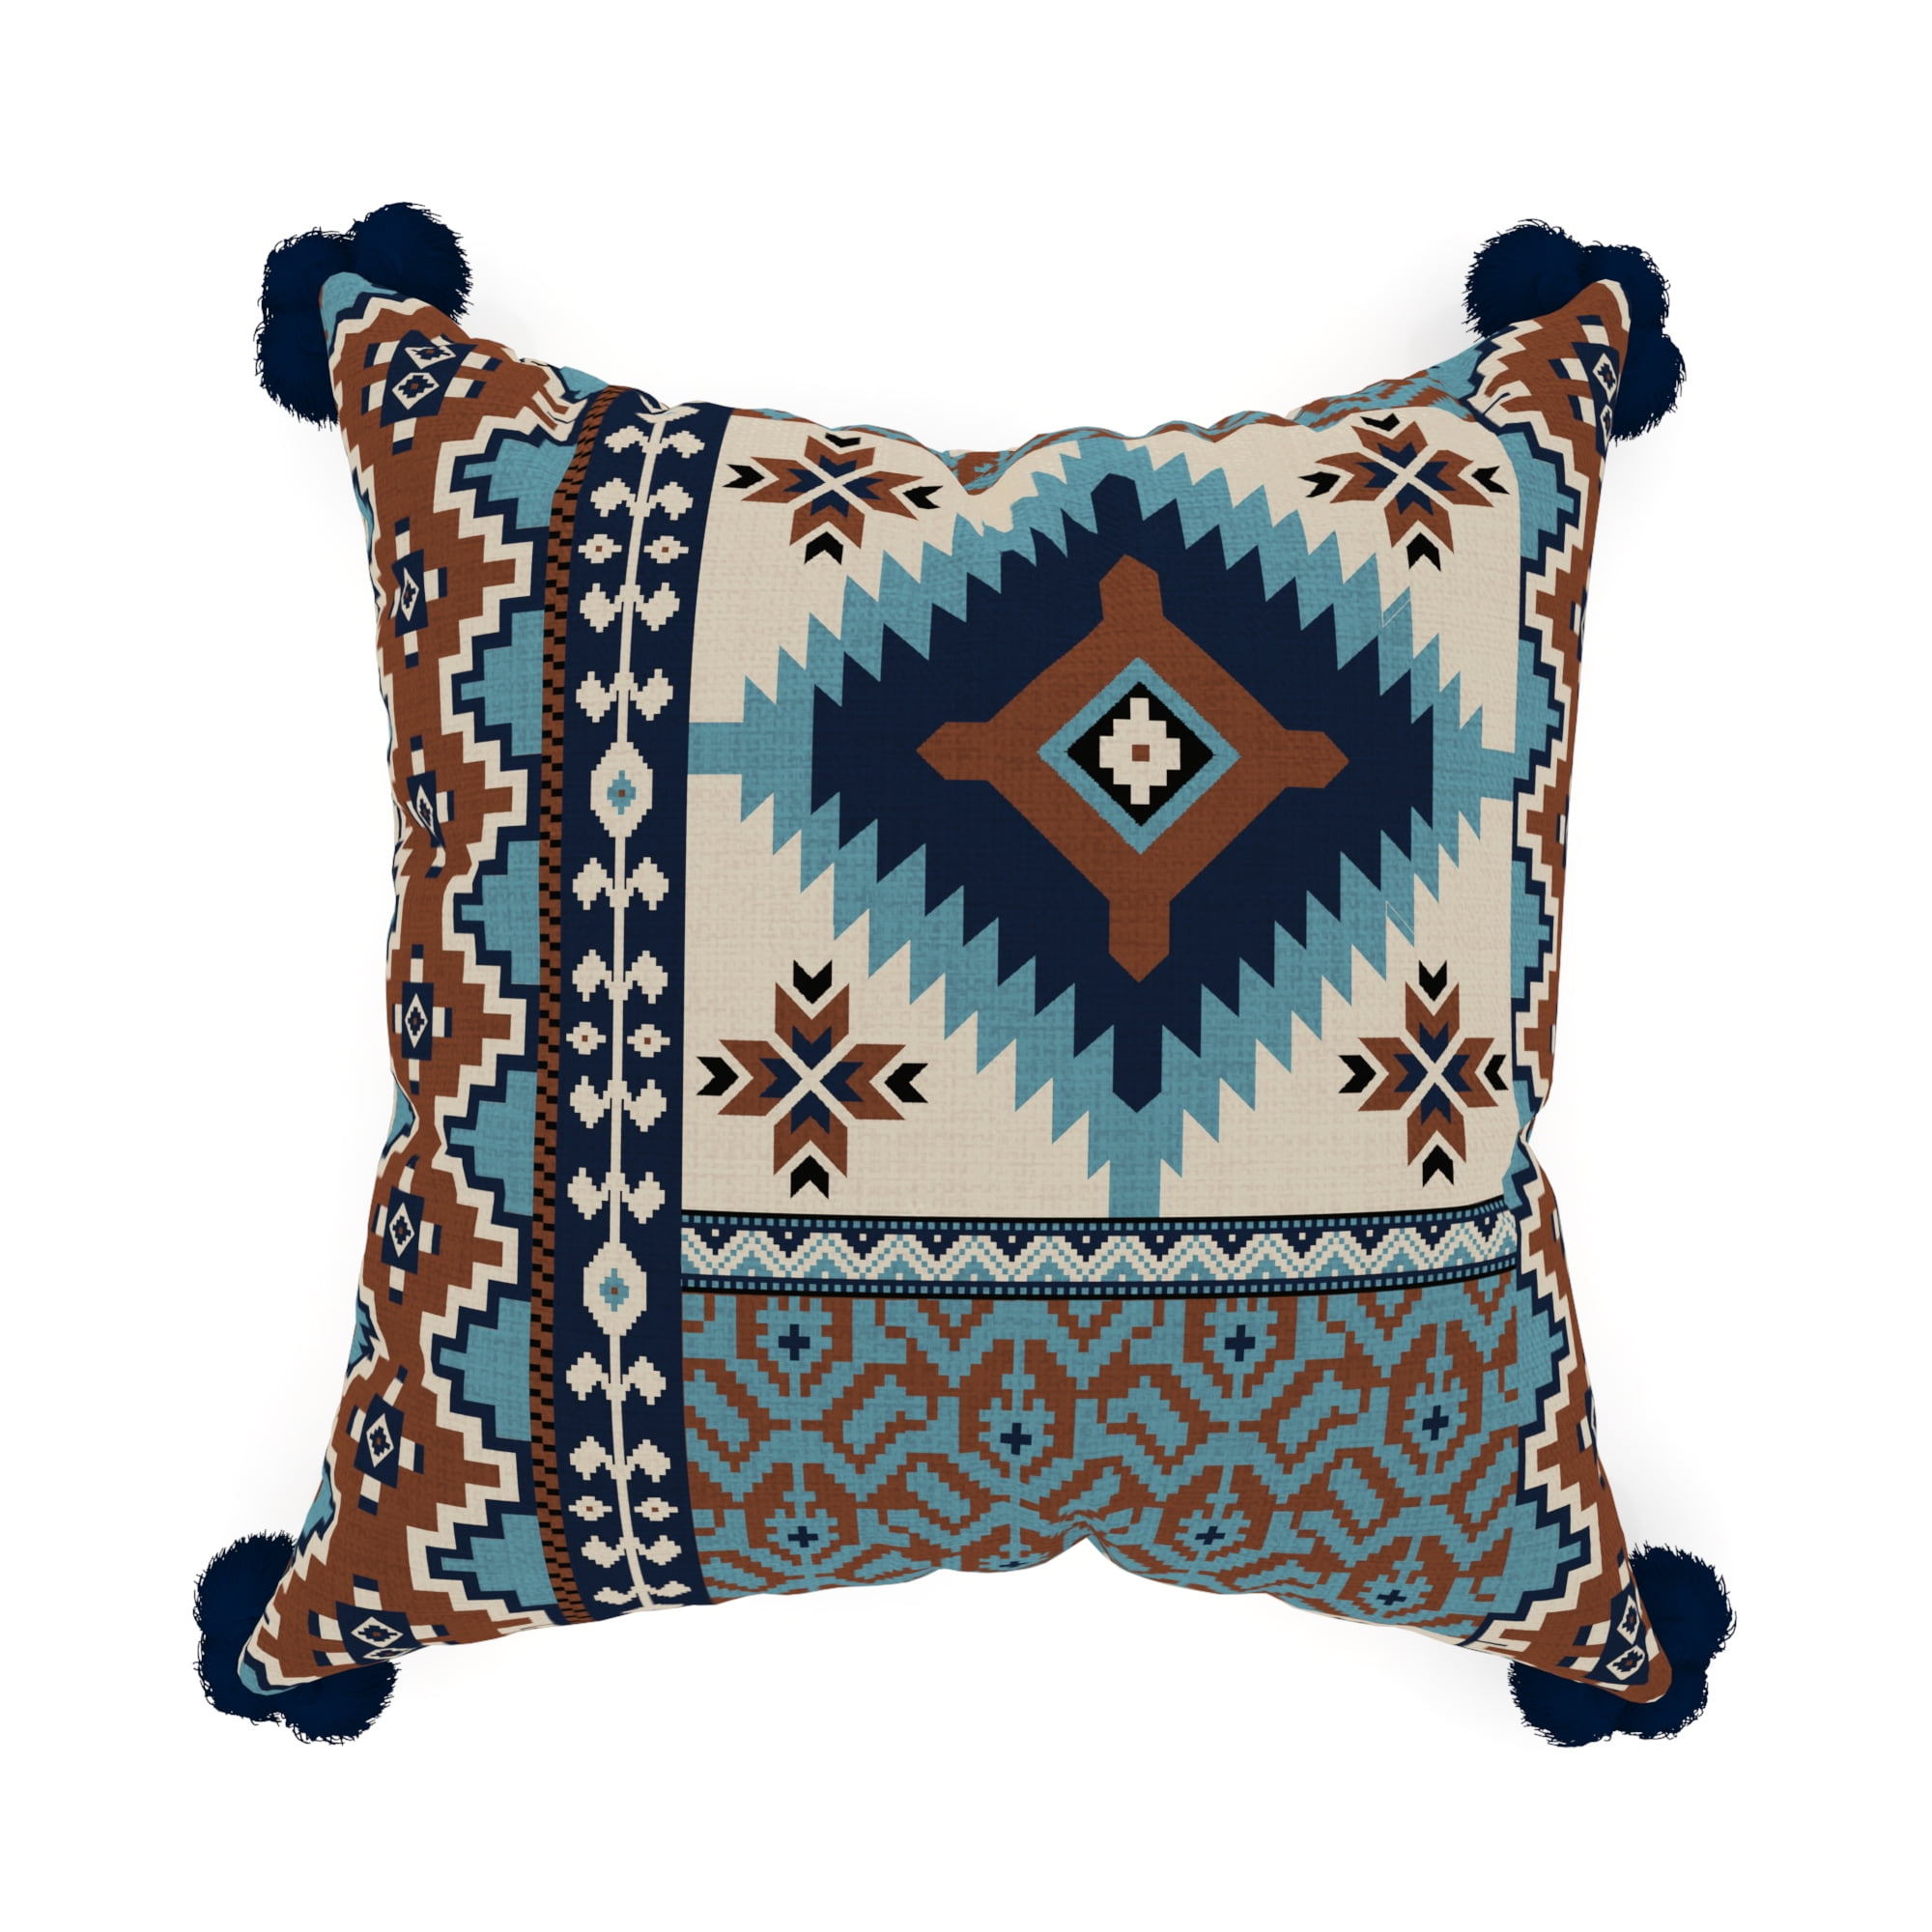 Ethnic pillow cover Waterproof case Home gifts patterned pillow blue pillow throw pillow Home decor Digital Print Cushion Cover